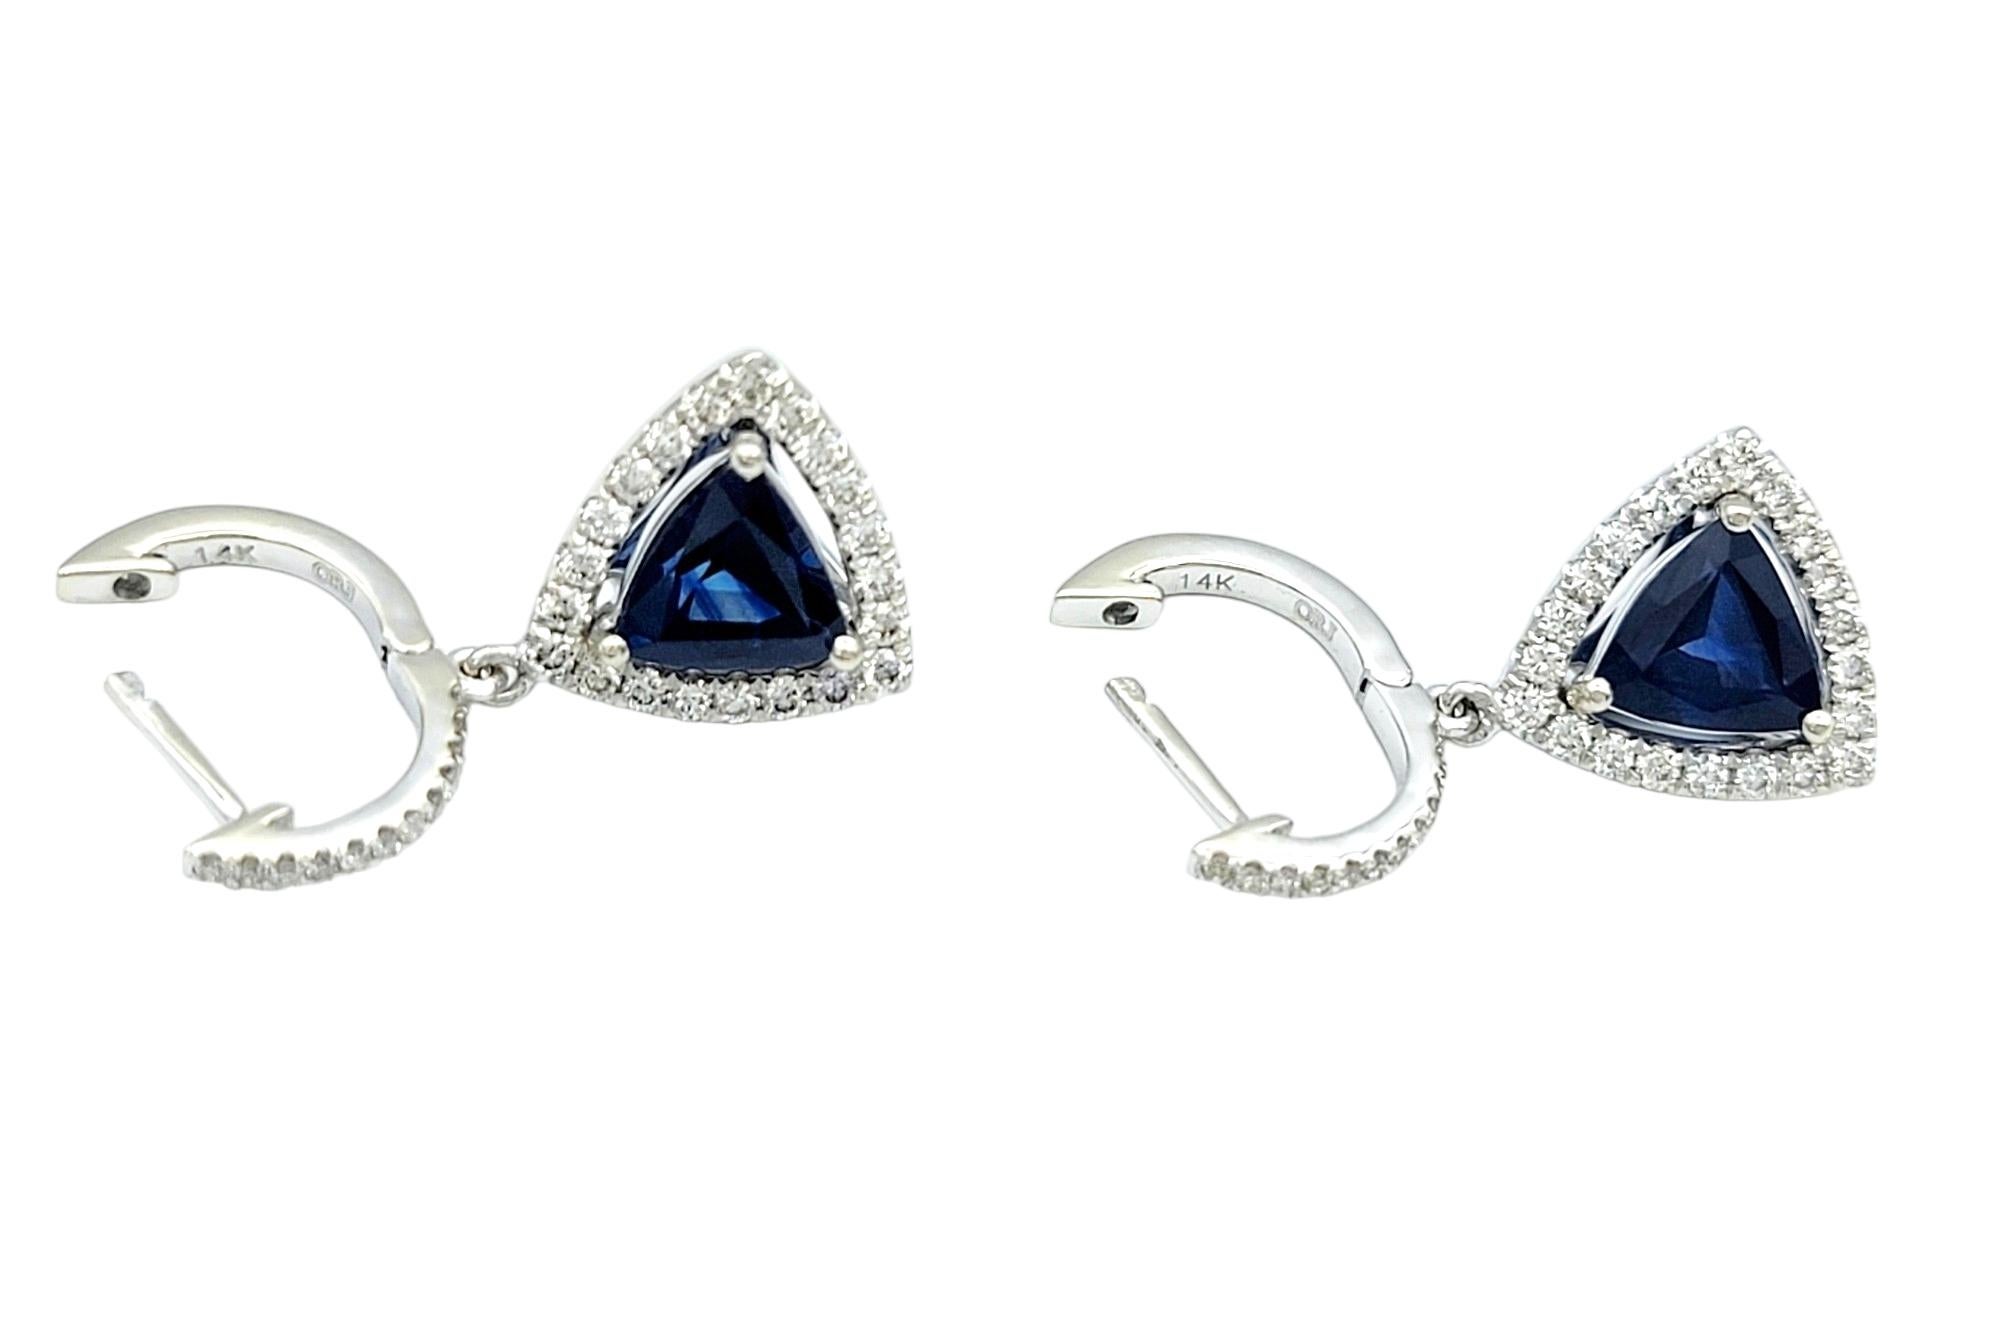 This stunning pair of drop dangle earrings, set in elegant 14 karat white gold, is a stunning display of sophistication. Each earring features a triangular blue sapphire at the center, surrounded by a halo of round diamonds. The combination of the